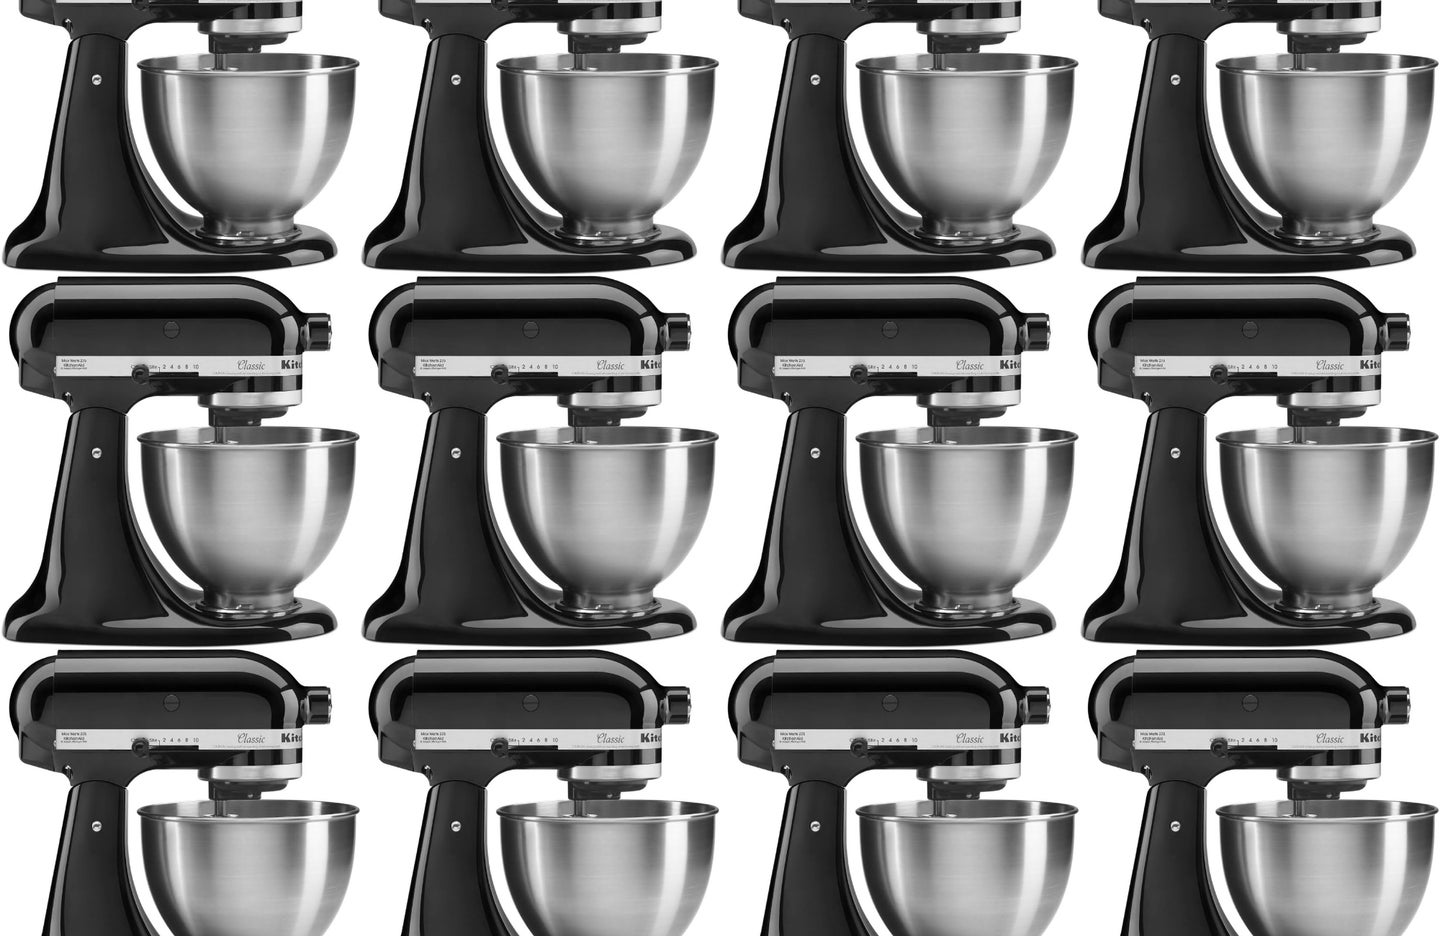 A tiled sequence of the KitchenAid Classic Series 4.5 Quart Tilt-Head Stand Mixer.